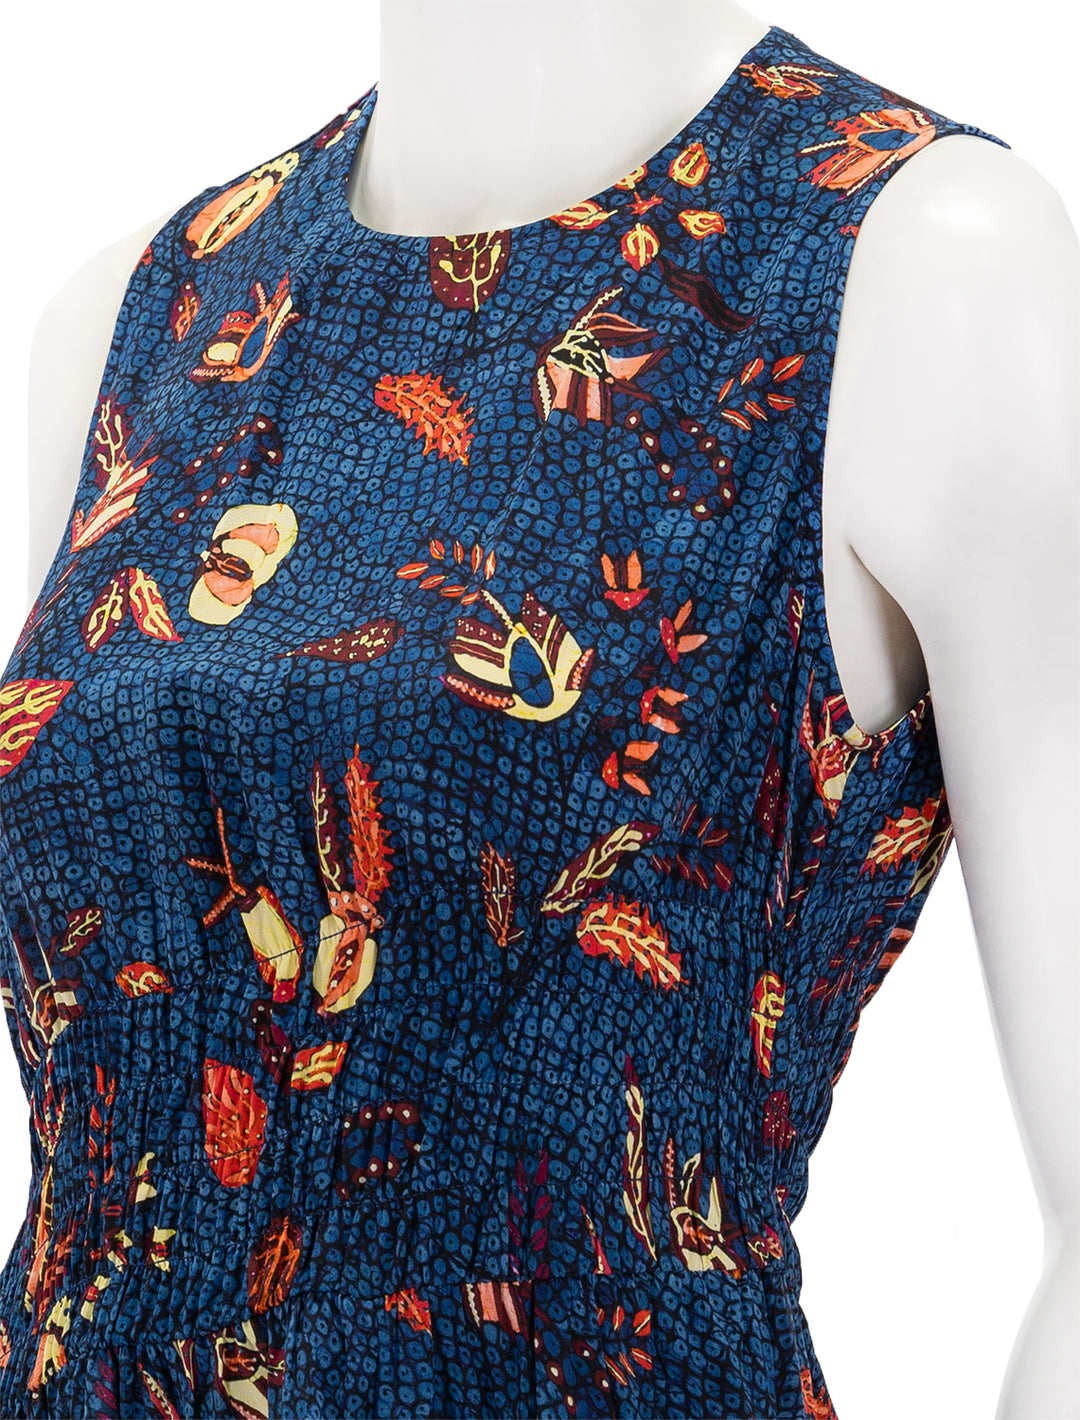 Close-up view of Ulla Johnson's luca dress in blue dahlia.